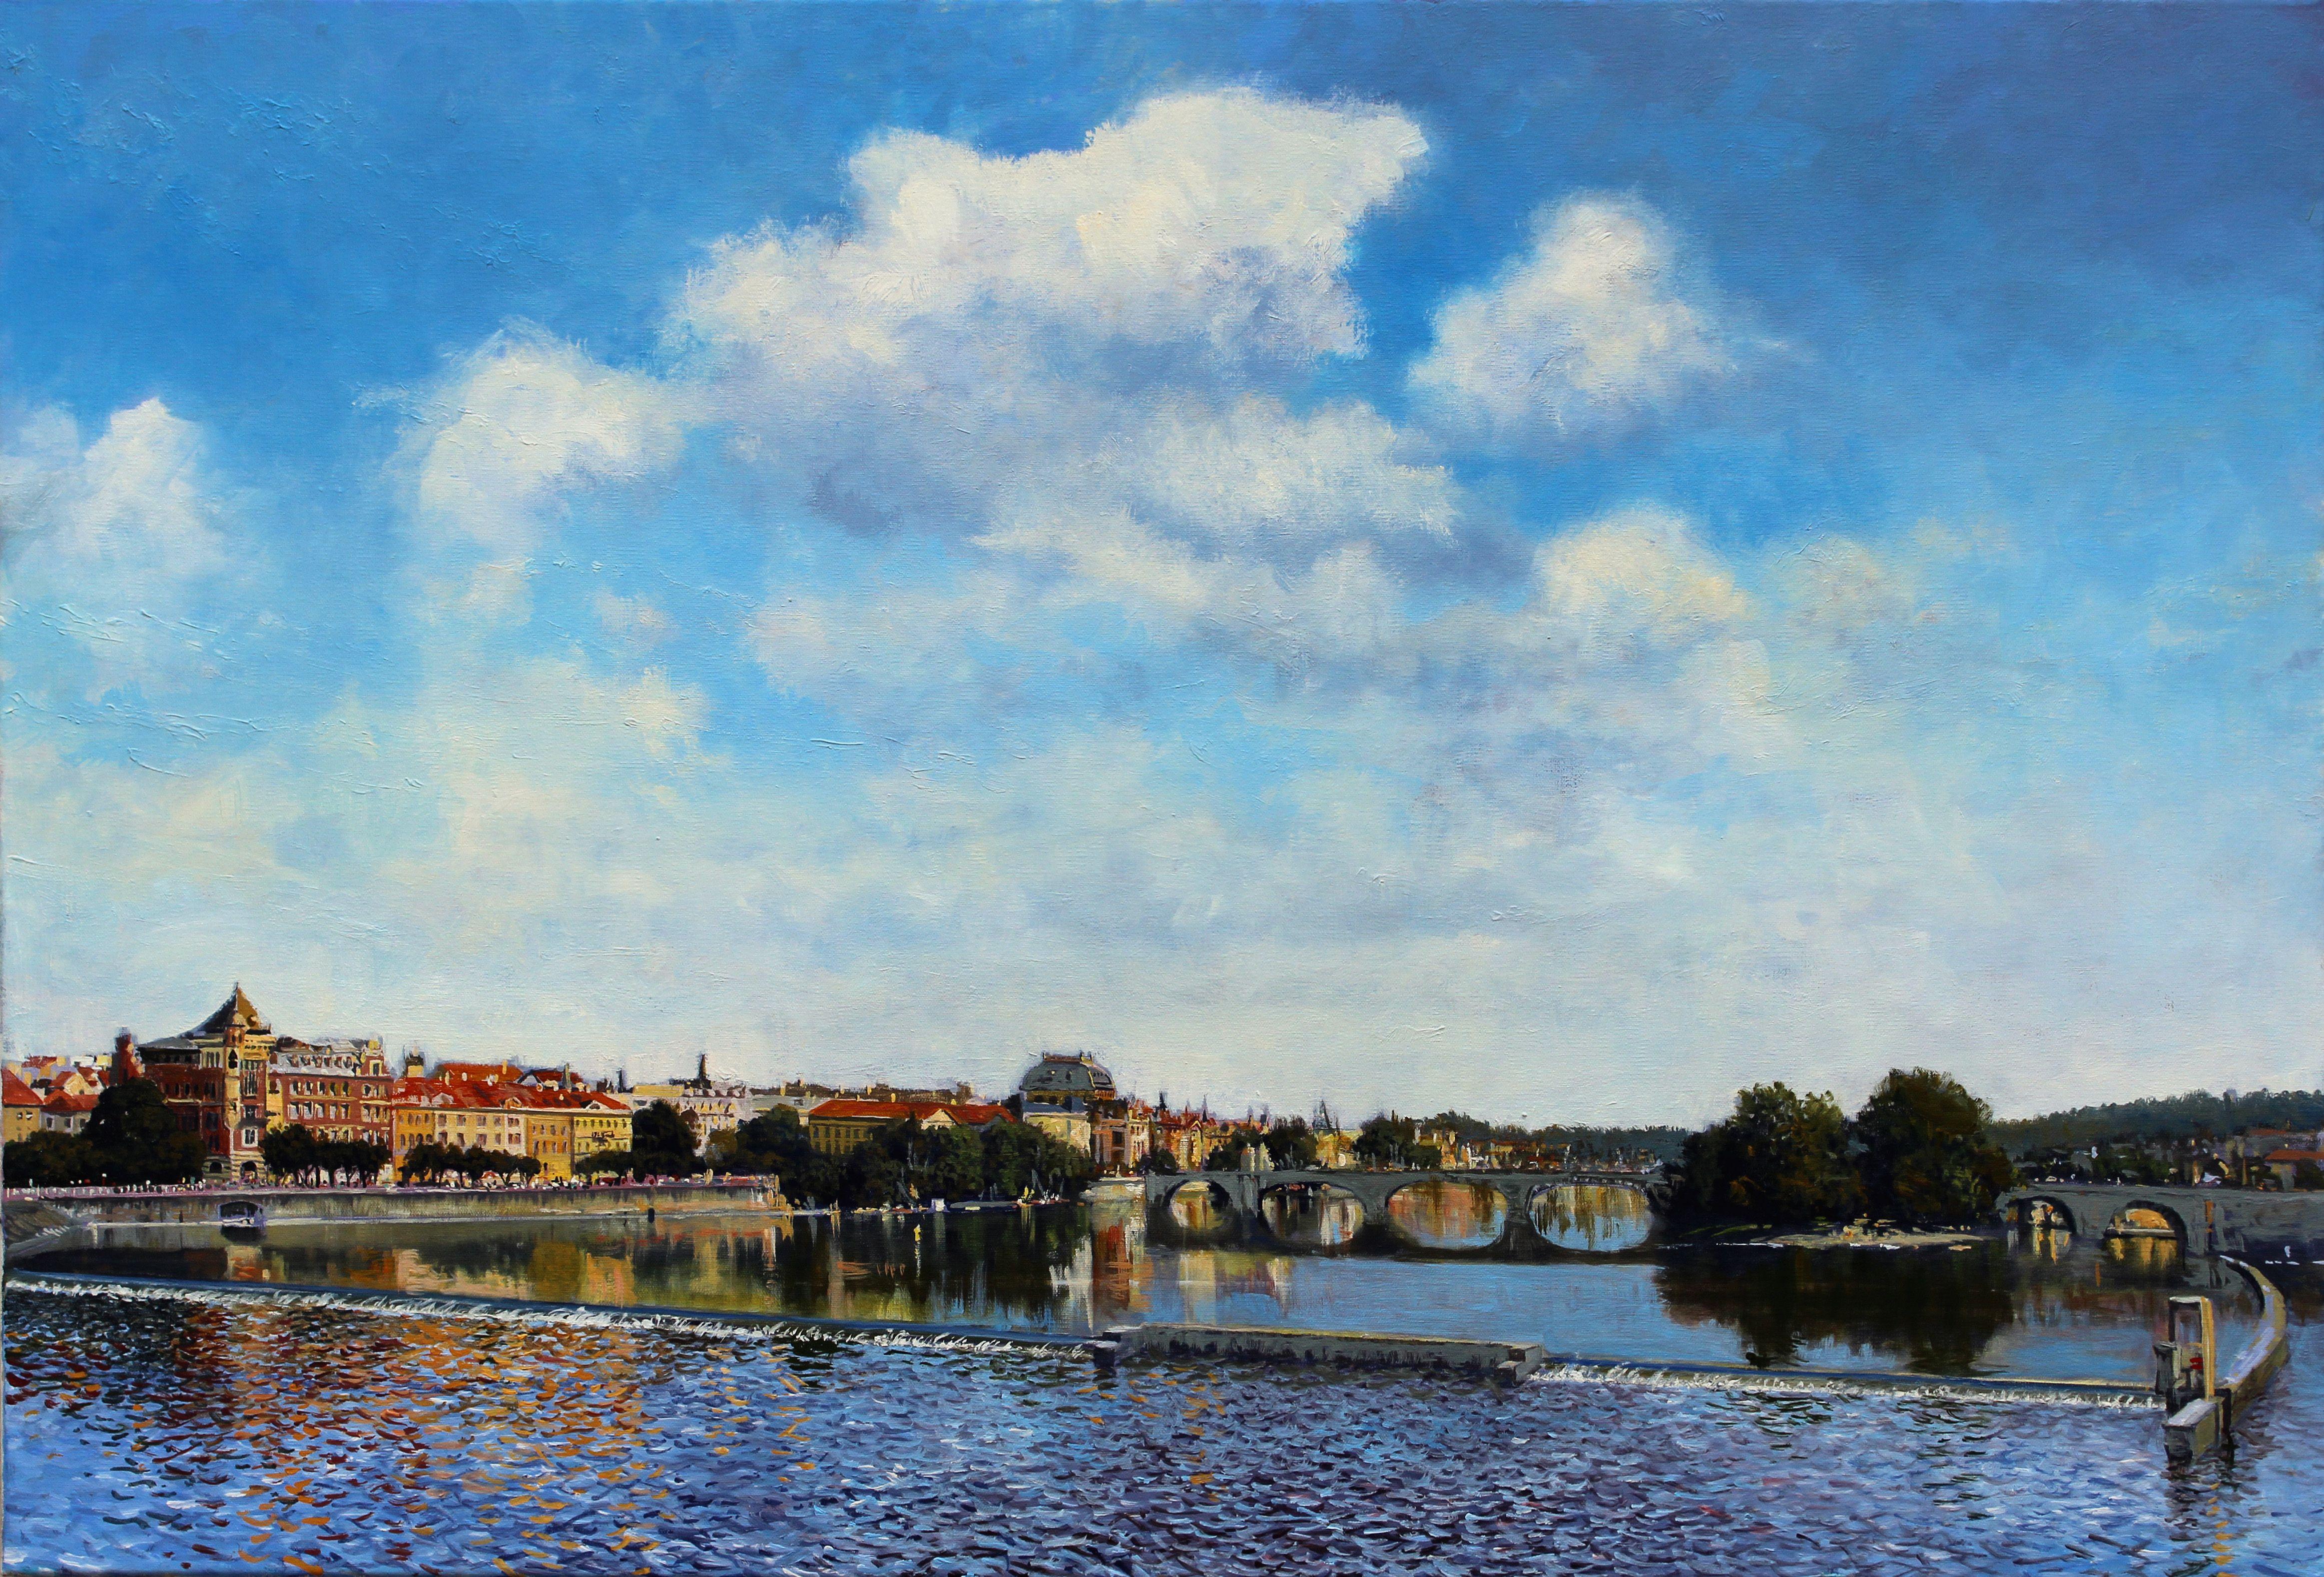 A sunny day in Prague. Clouds move silently over the gentle water of the Vltava river. The bridge was built between 1899 â€“ 1901 and replaced the earlier Francis I Chain Bridge (built in 1841). It was famously opened on 14th June 1901.  The bridge